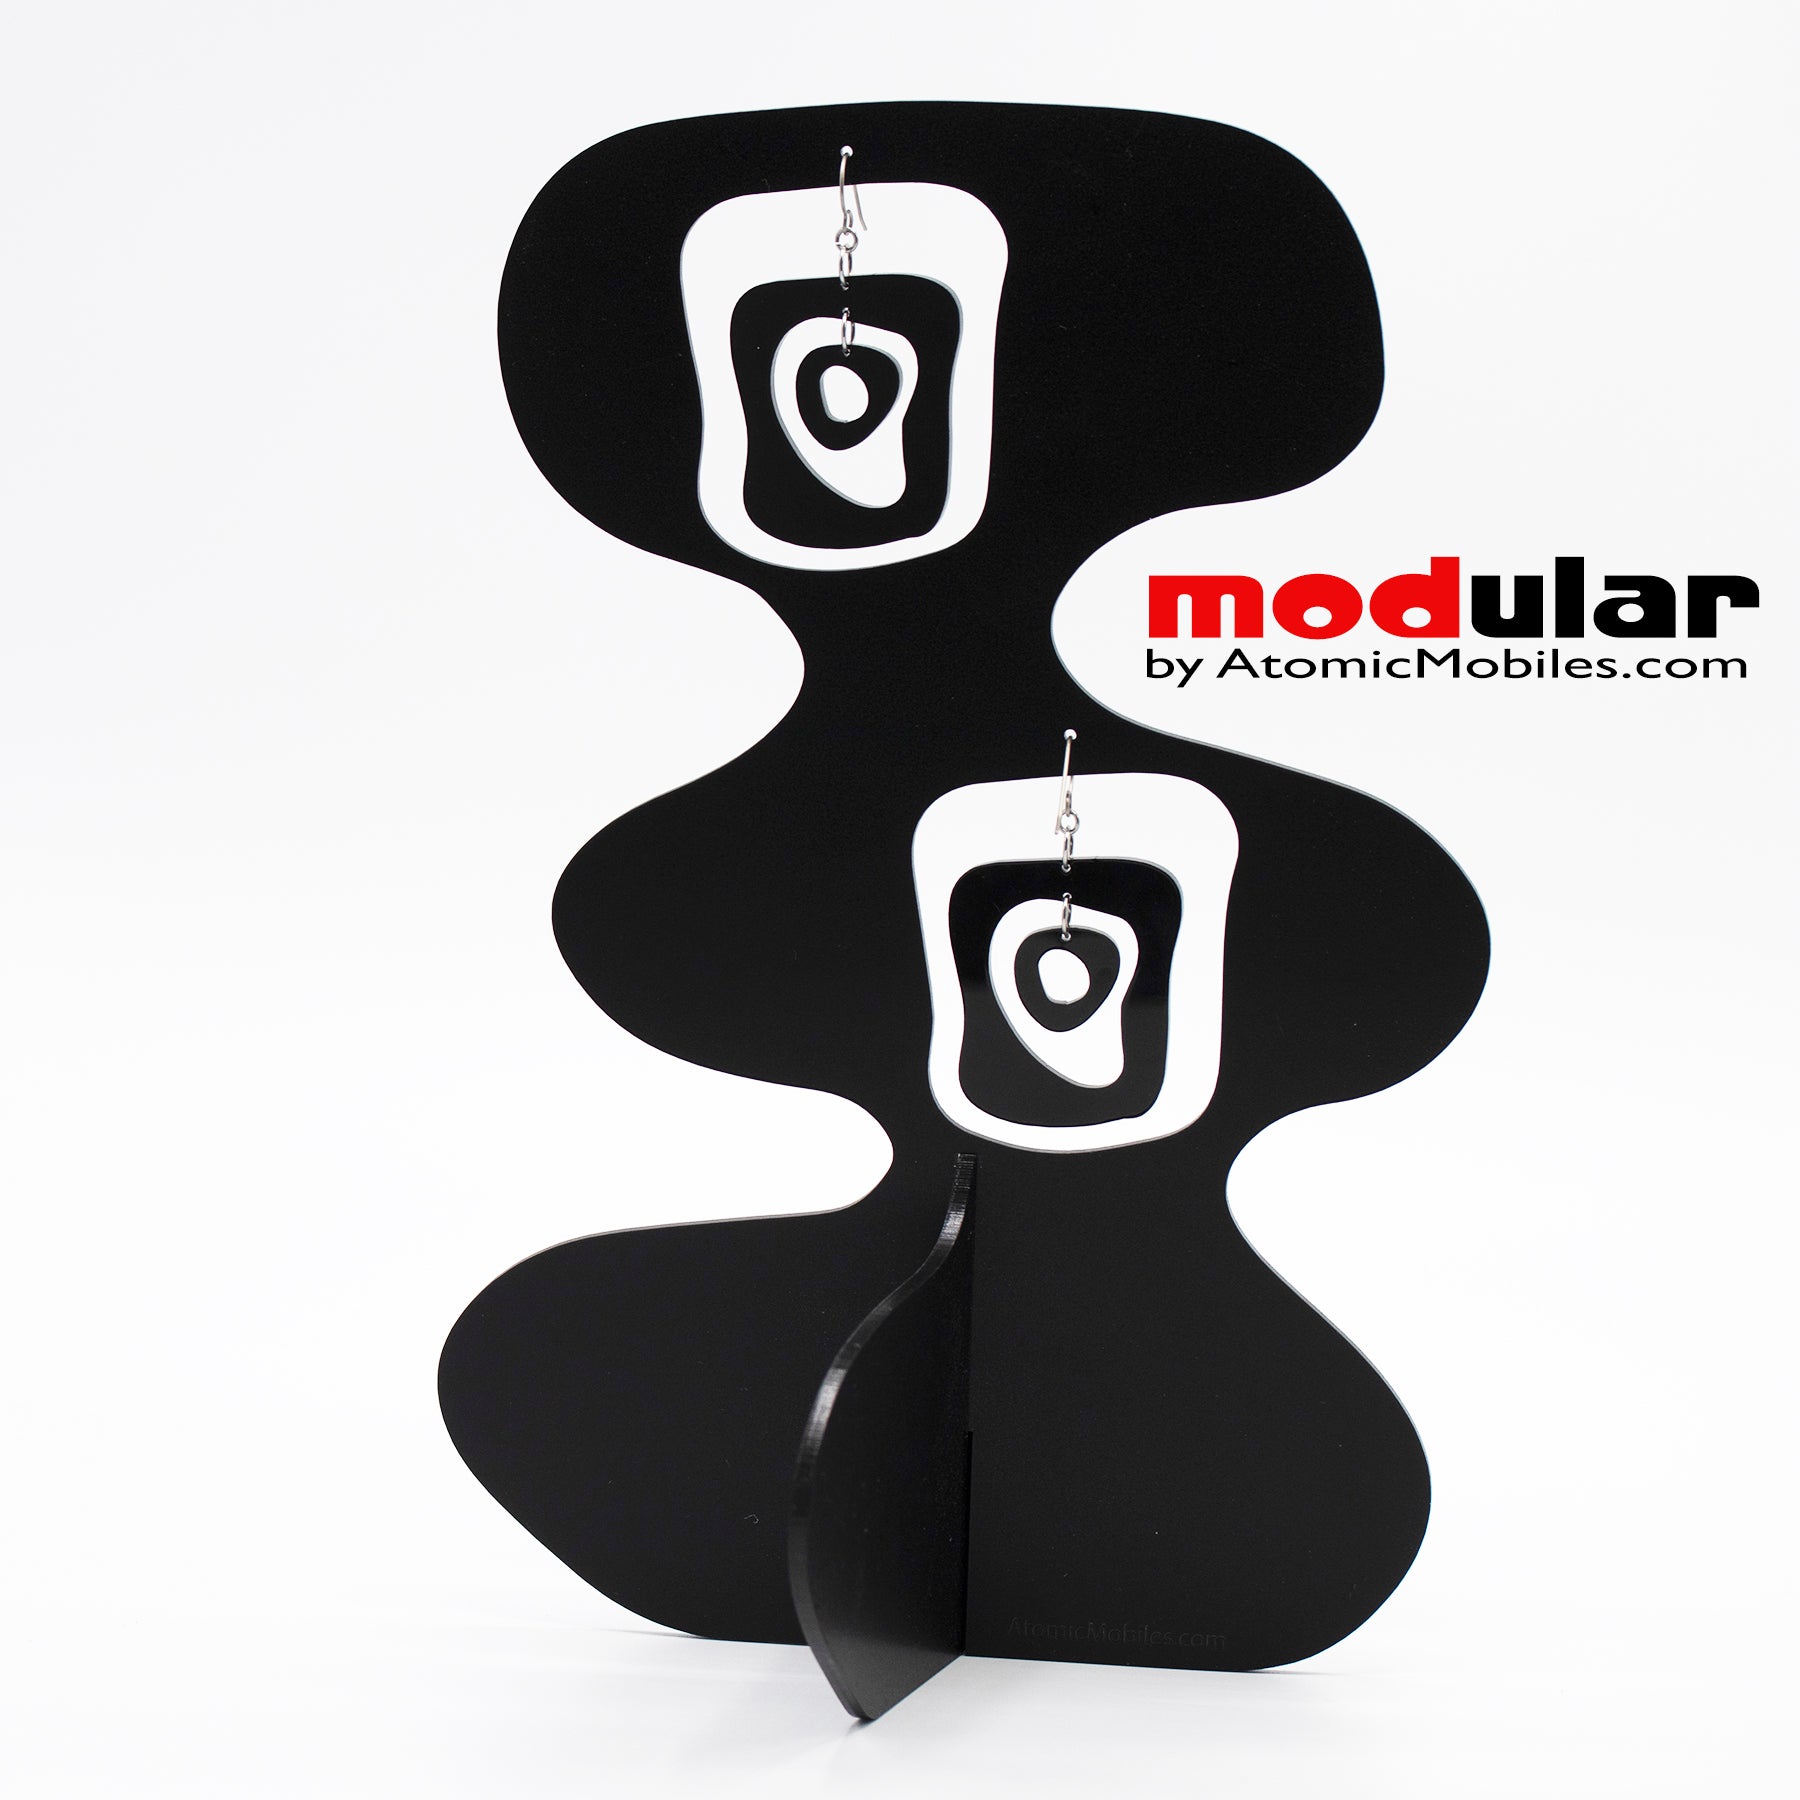 Handmade Mid Mod retro midcentury style earrings and stabile kinetic modern art sculpture in Black by AtomicMobiles.com